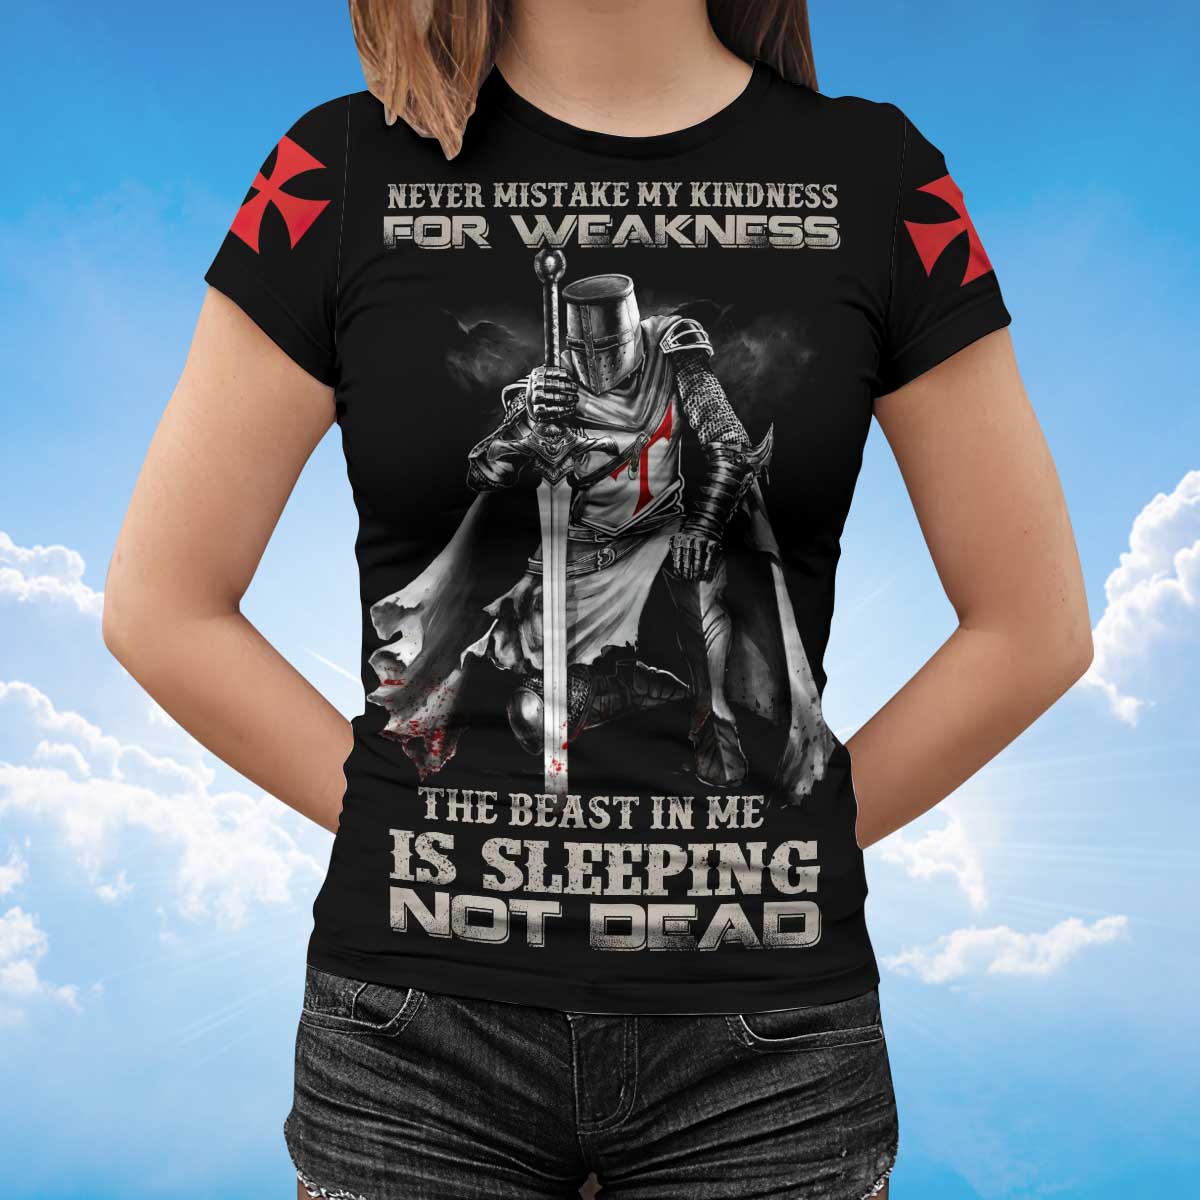 3D All Over Print Black Knights Templar Shirt The Beast In Me Is Sleeping Not Dead T Shirt